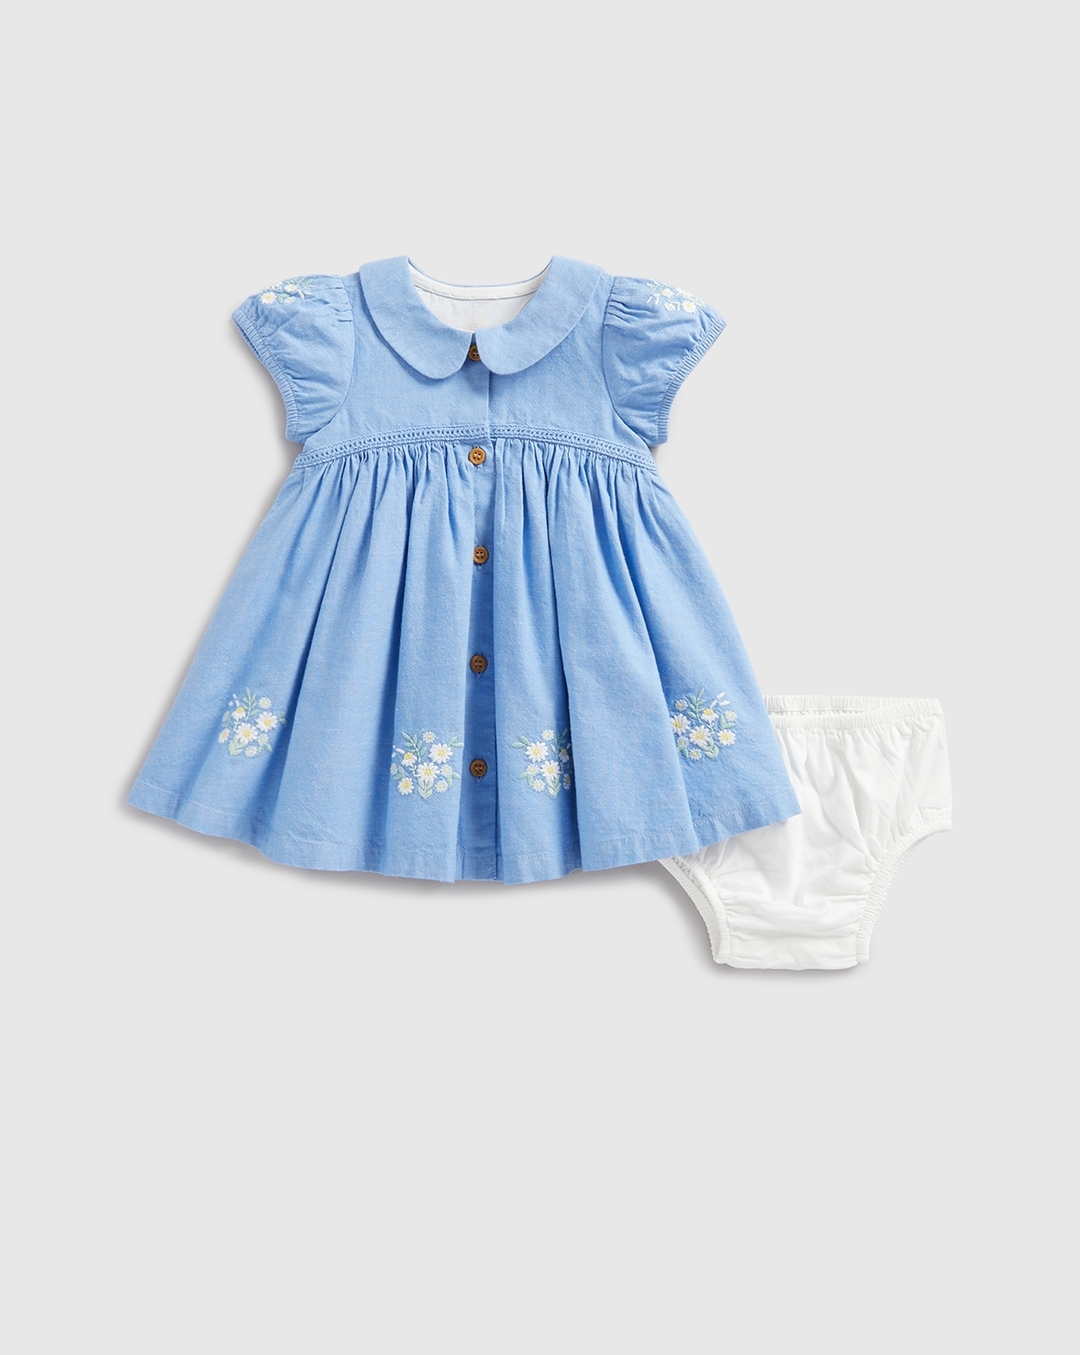 Buy Girls Sleeveless Dress Floral Design-Blue Online at Best Price |  Mothercare